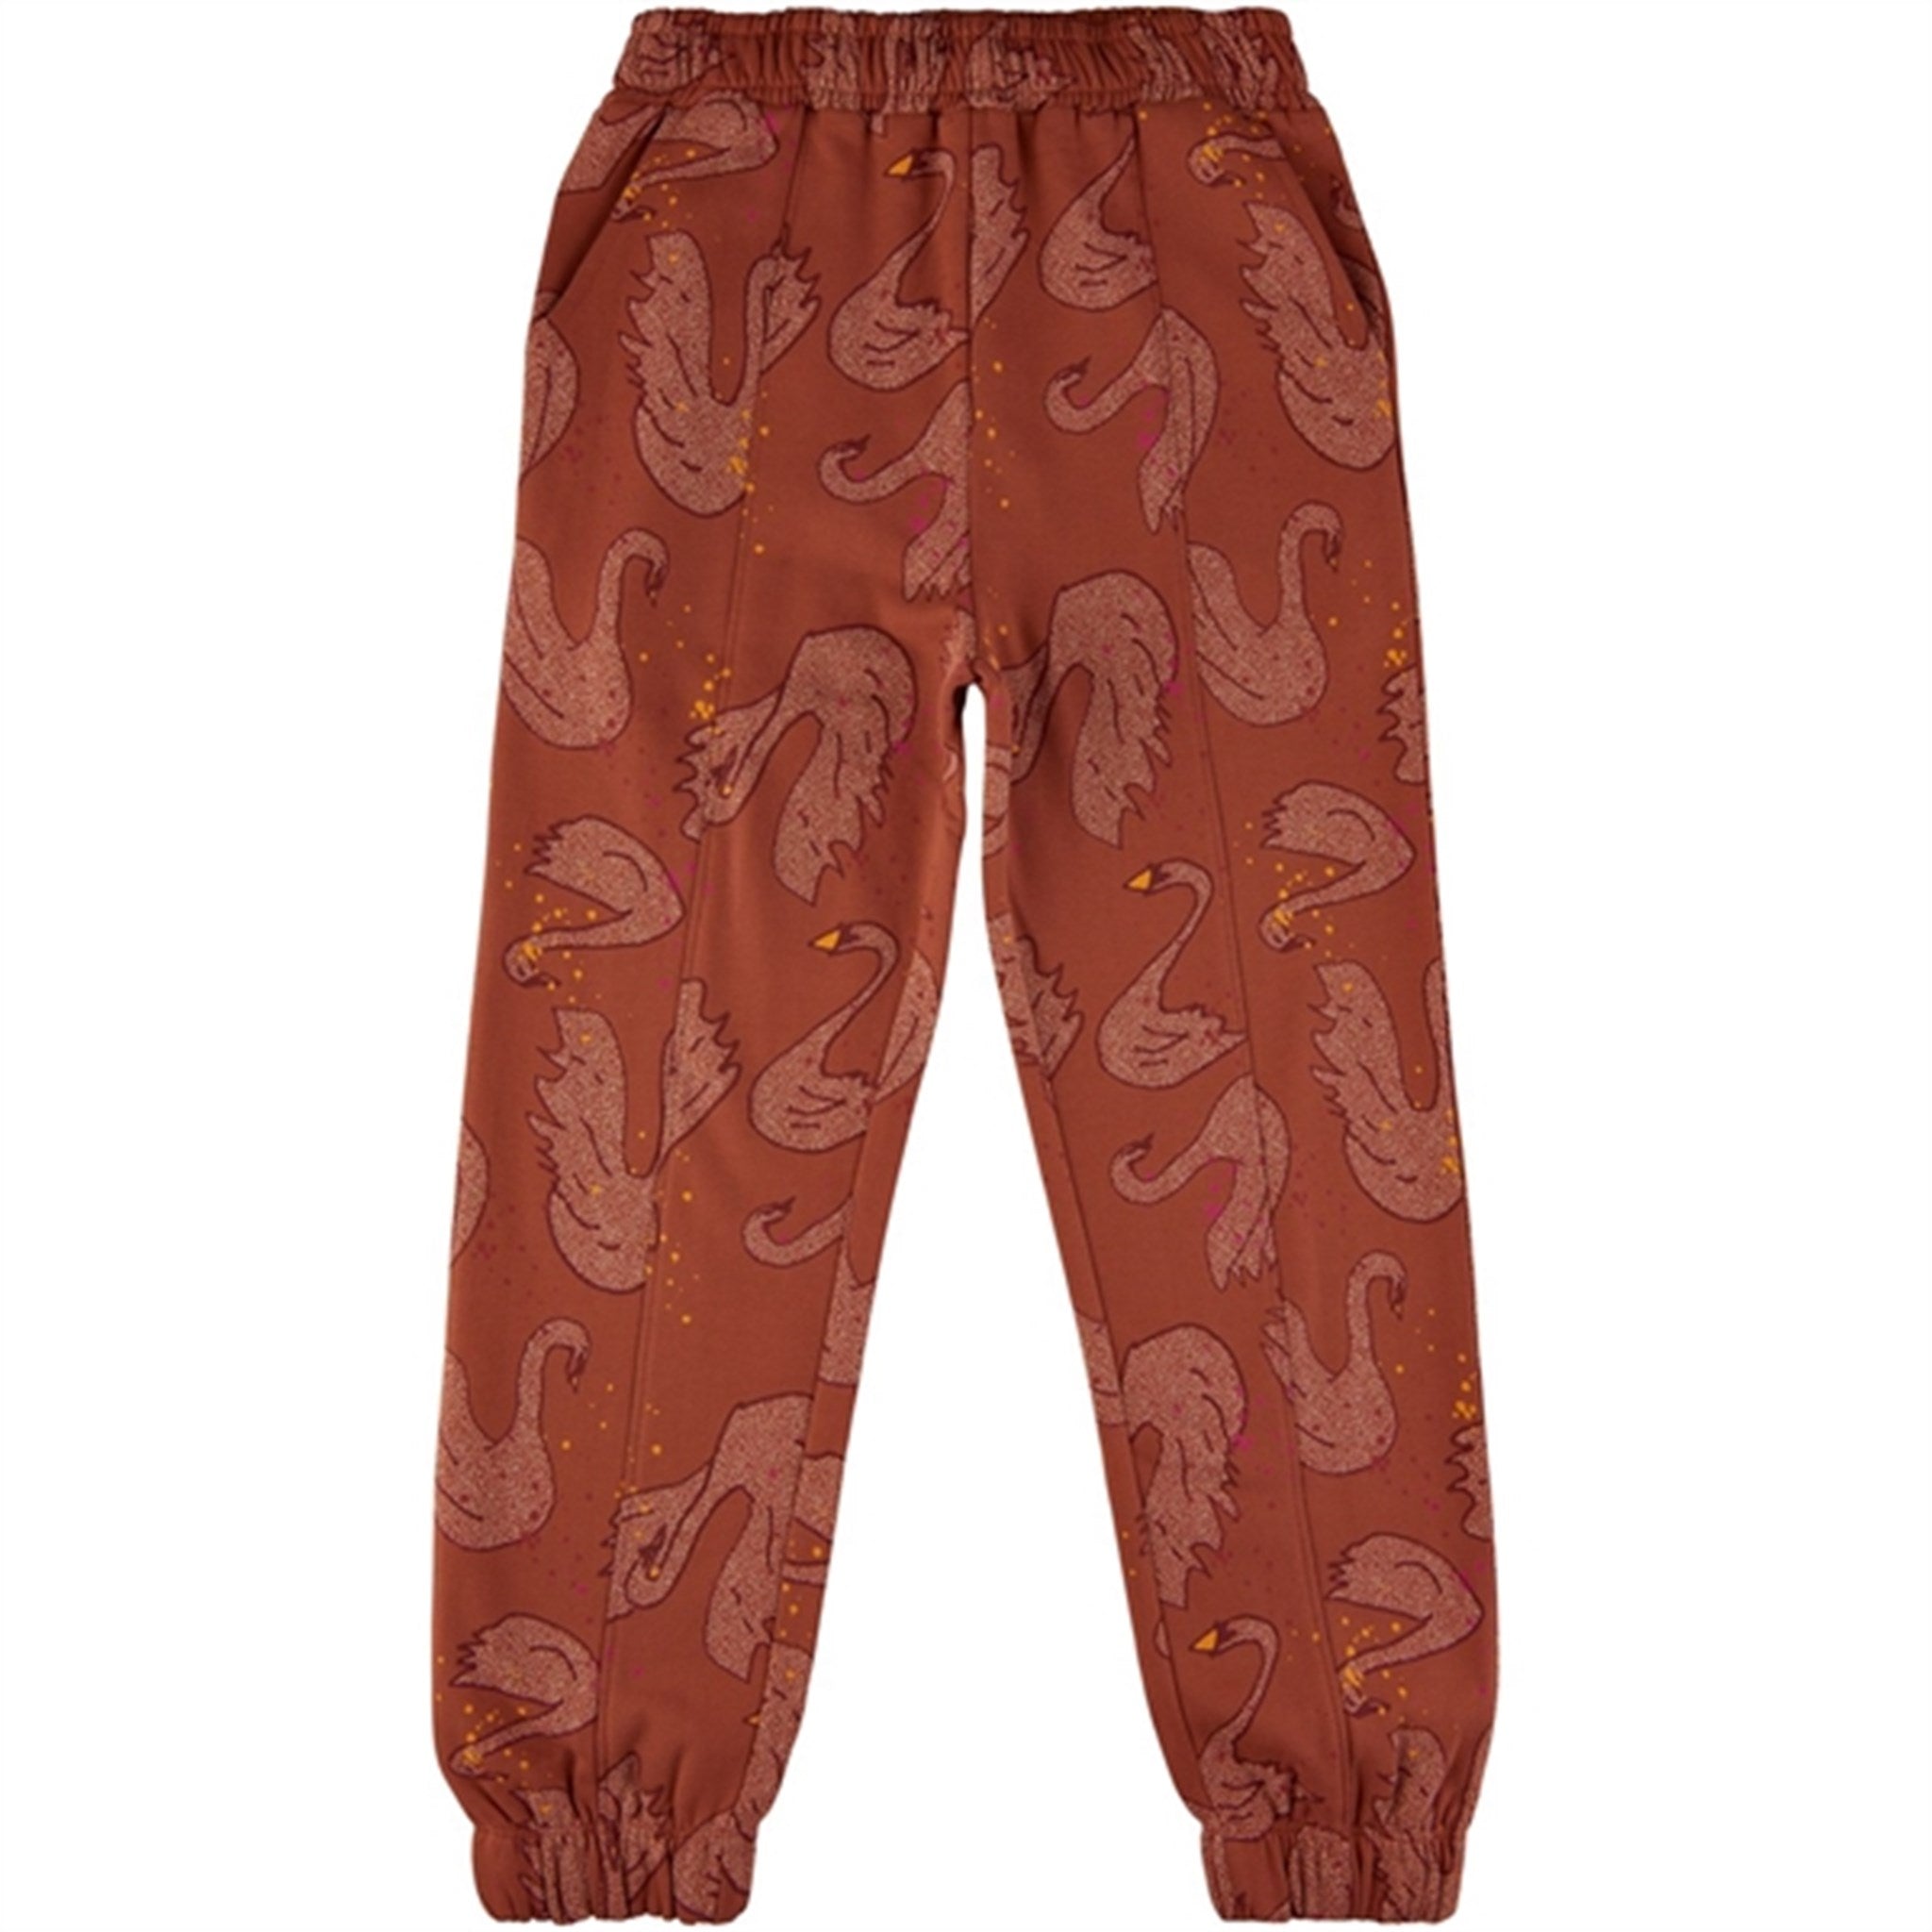 Soft Gallery Baked Clay Jagger Swan Sweatpants